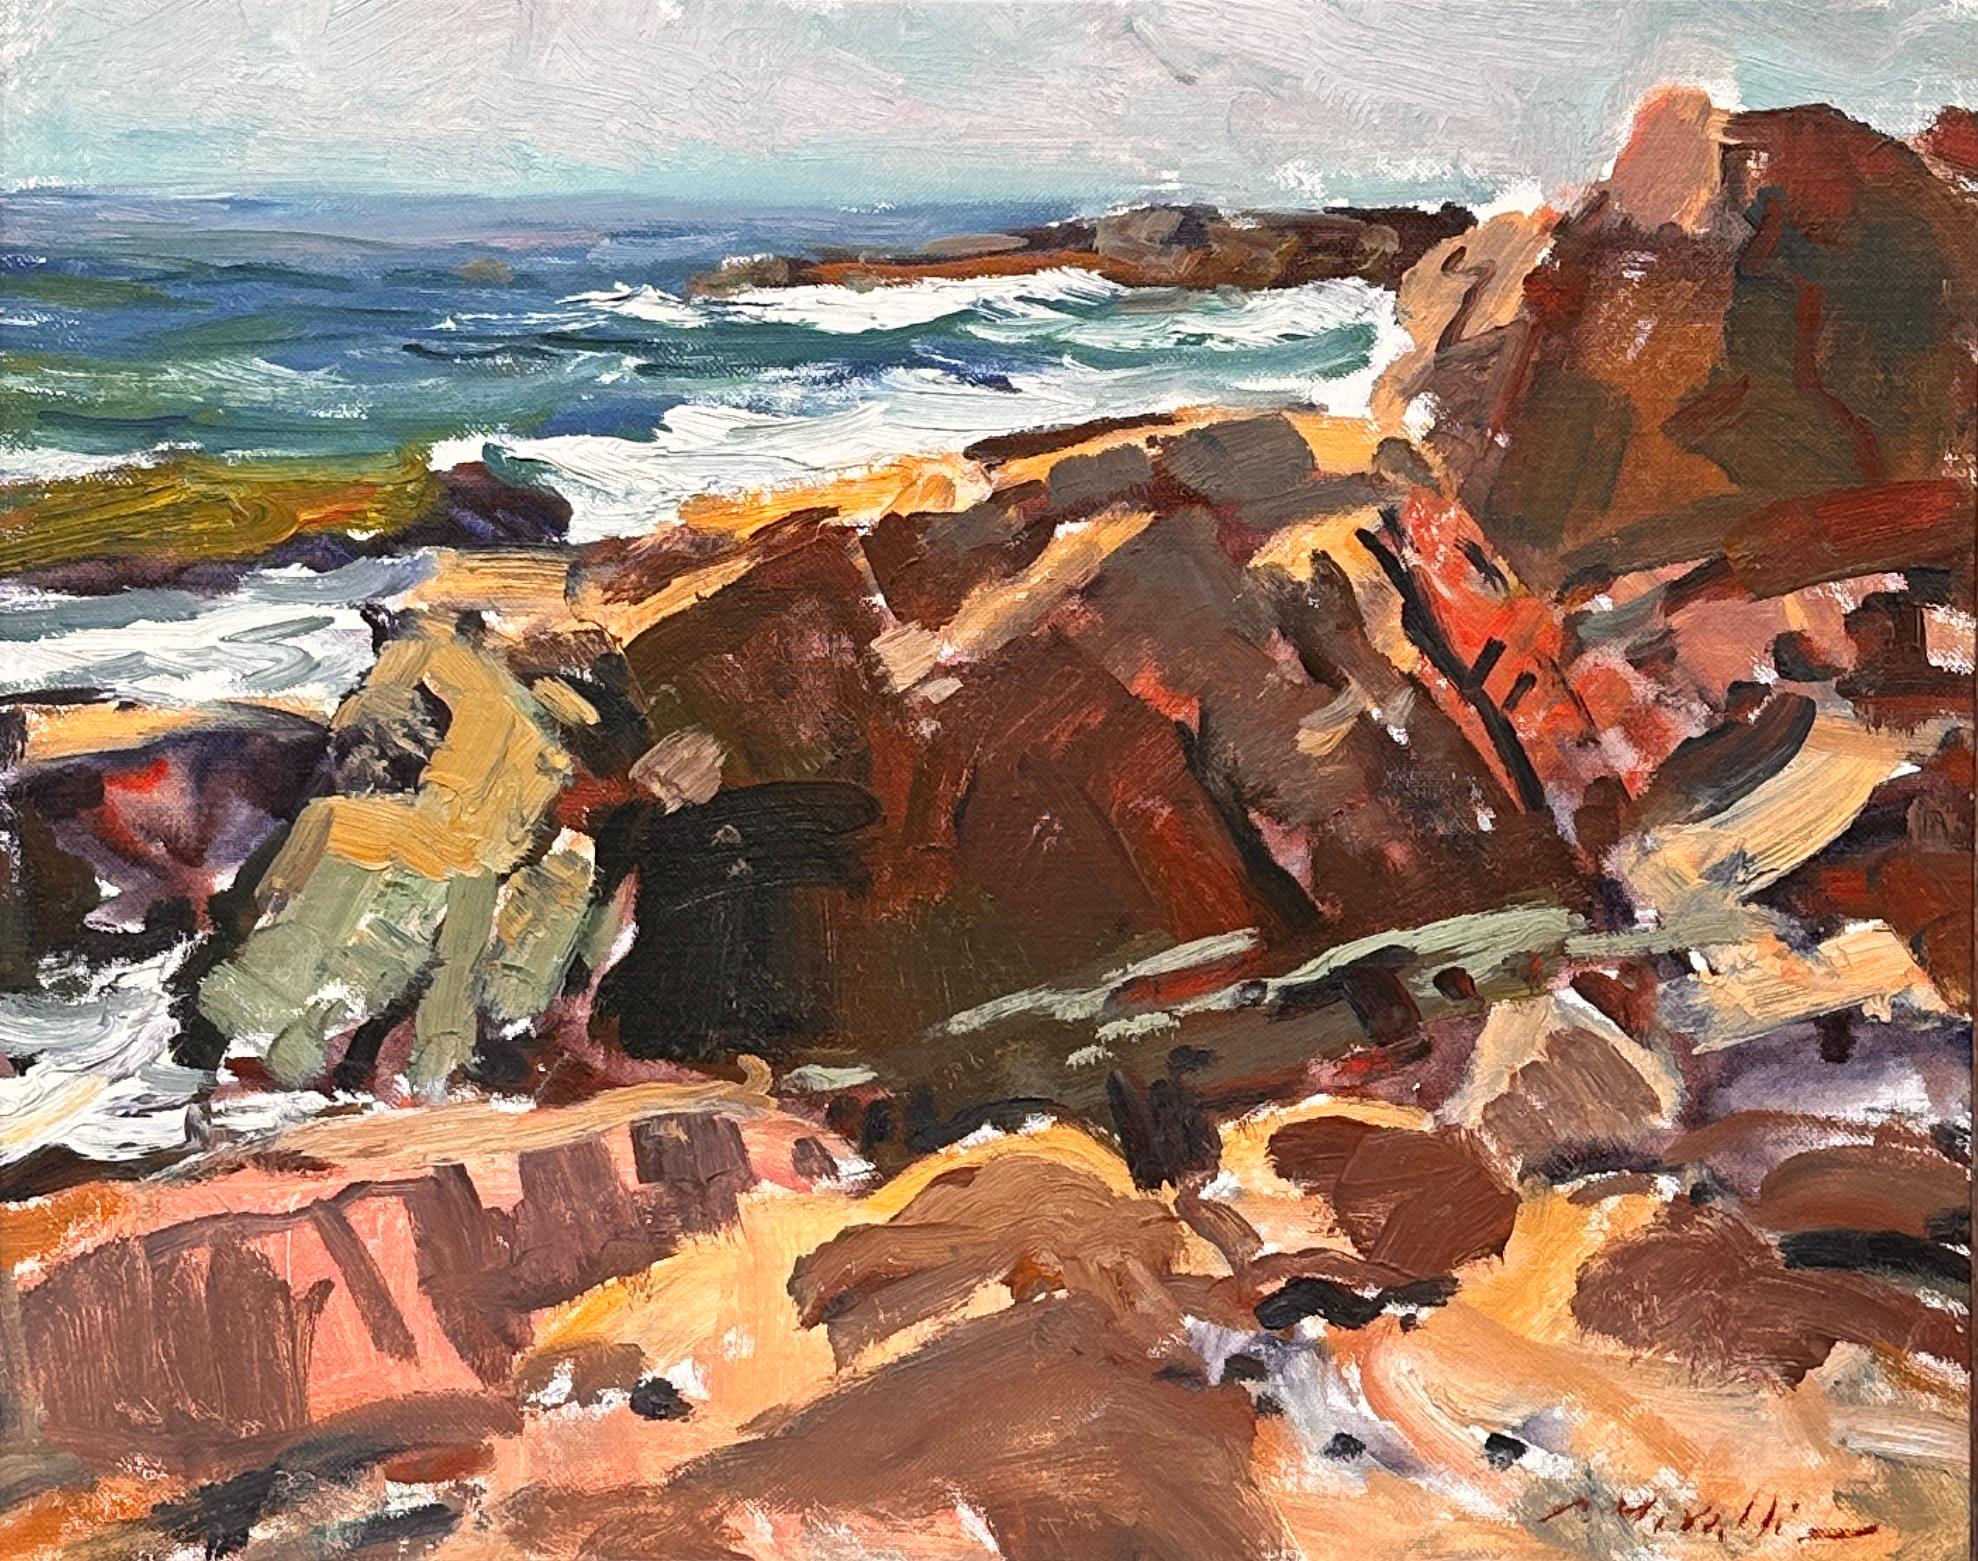 Wonderful expressive example of the often panted Bass Rocks in Gloucester, MA by the Master Charles Movalli. 

Charles Movalli (1945–2016) had a BA from Clark University and a PhD from the University of Connecticut. He painted and wrote about art